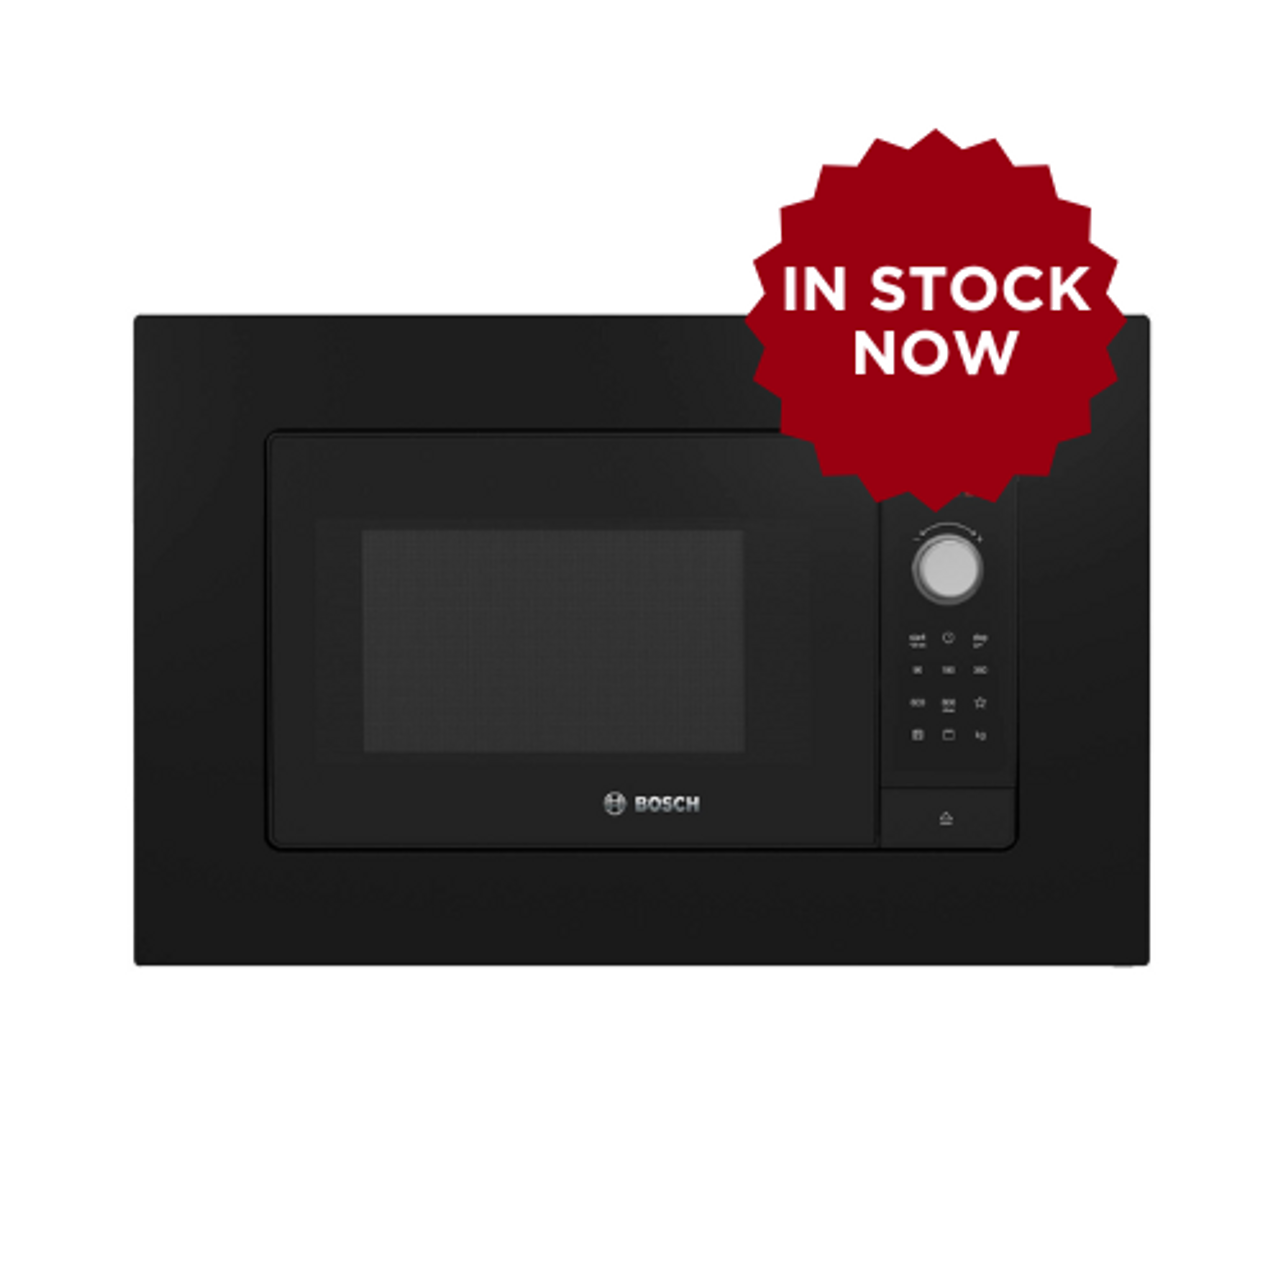 BEL653MB3A - Serie 2 Built-In Microwave Oven 59 x 38 cm - Black